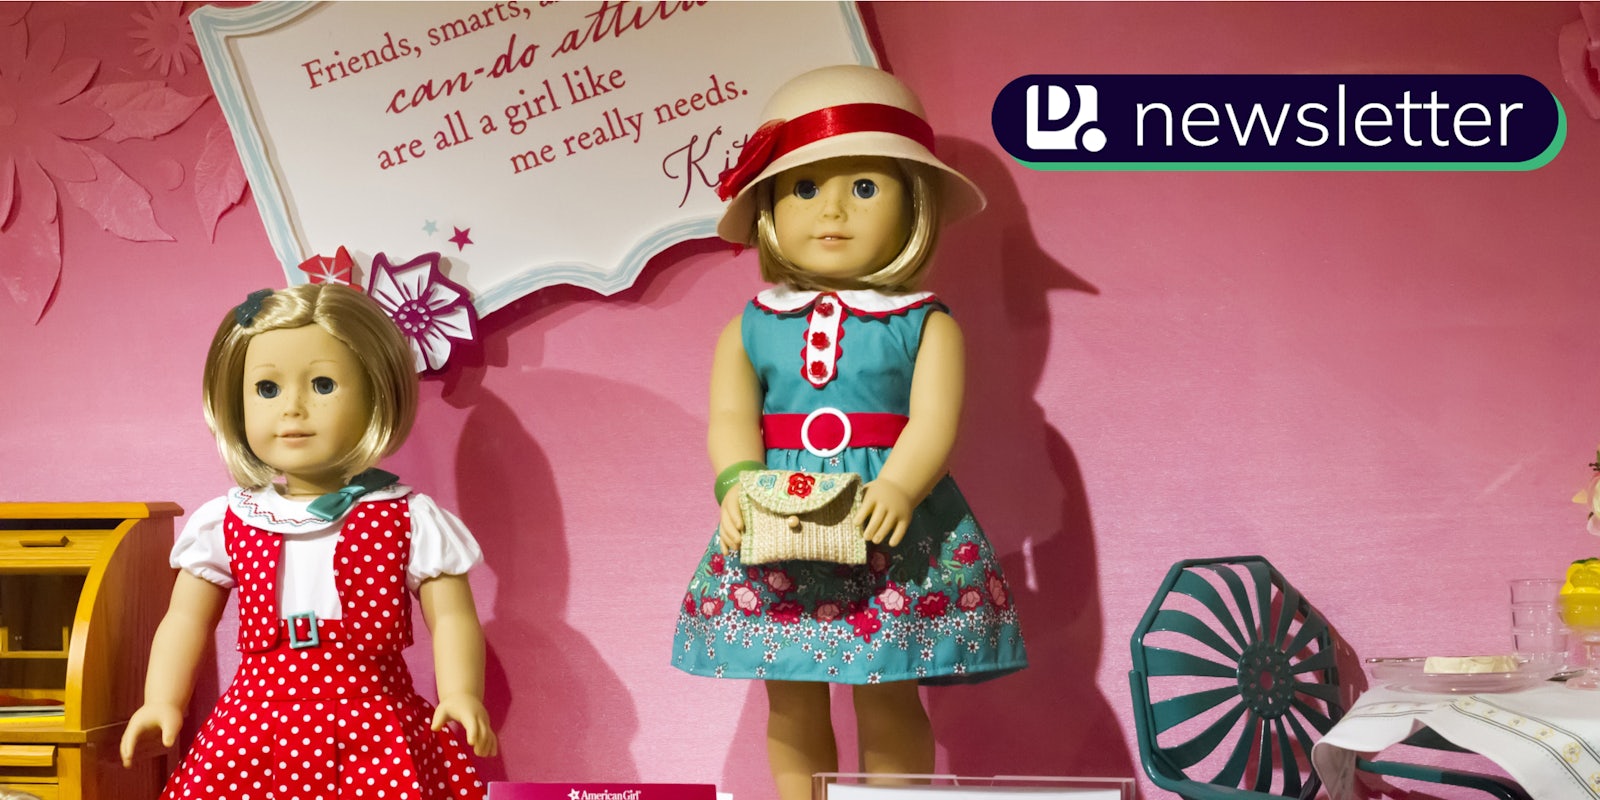 Two American Girl Dolls. The Daily Dot newsletter logo is in the top right corner.